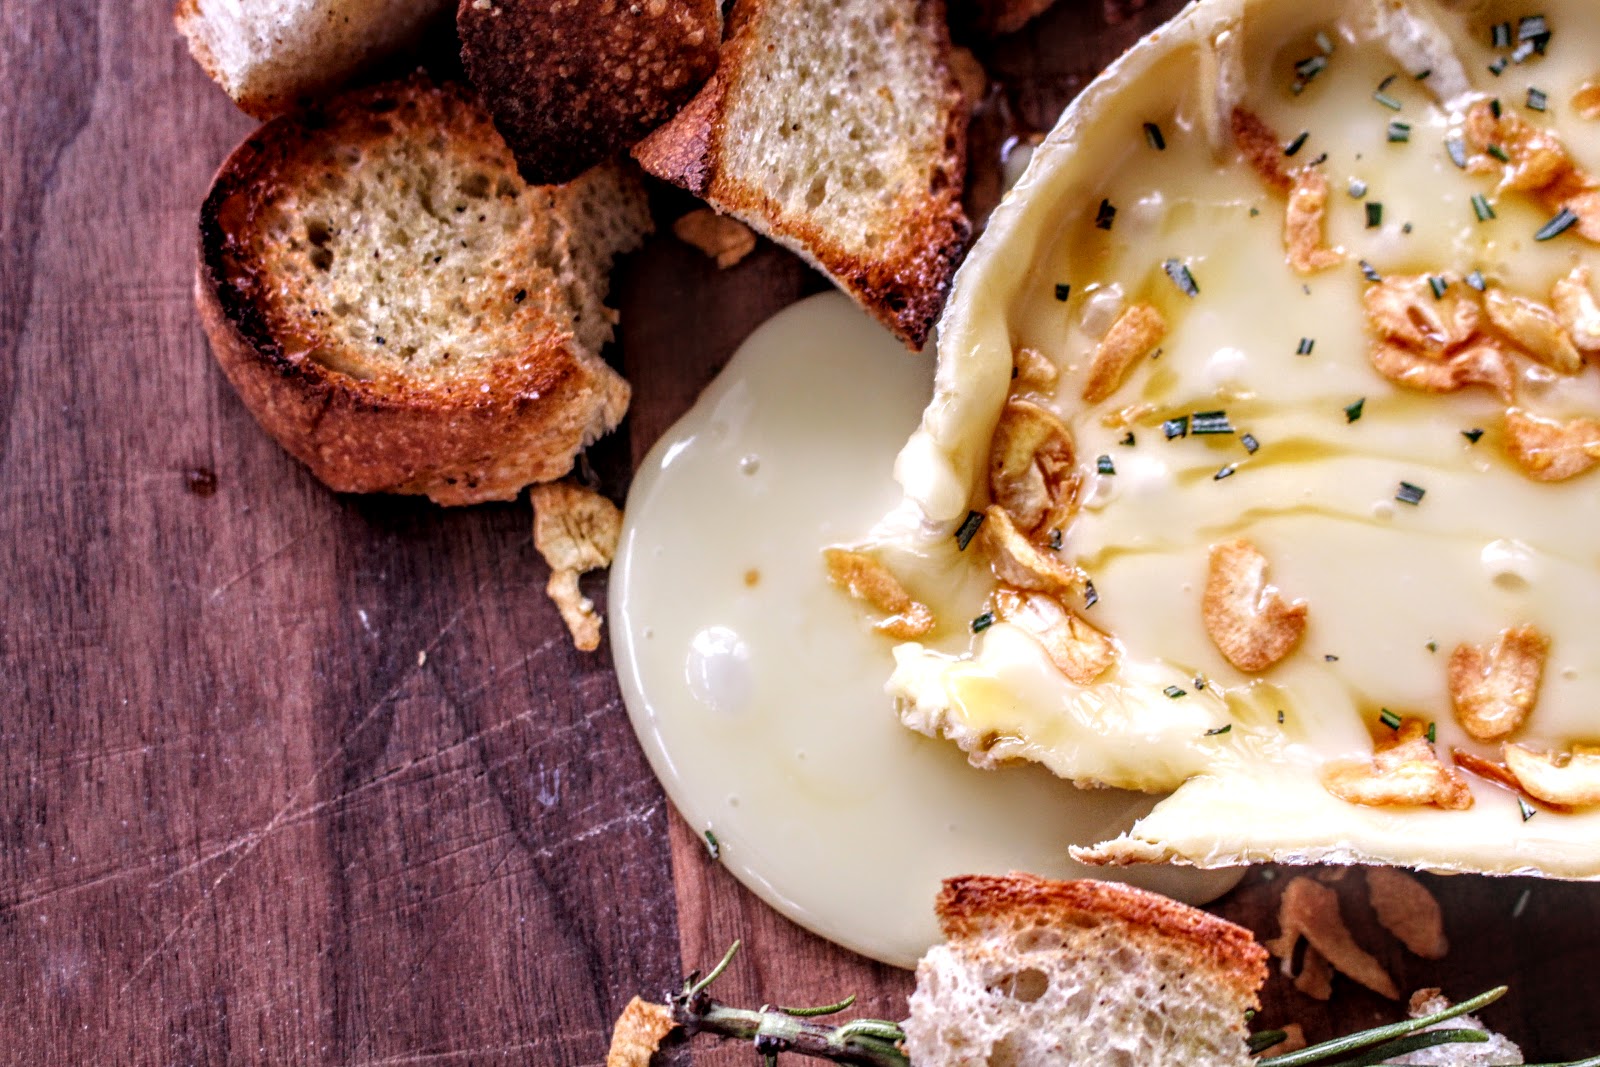 The Owl with the Goblet: Baked Camembert